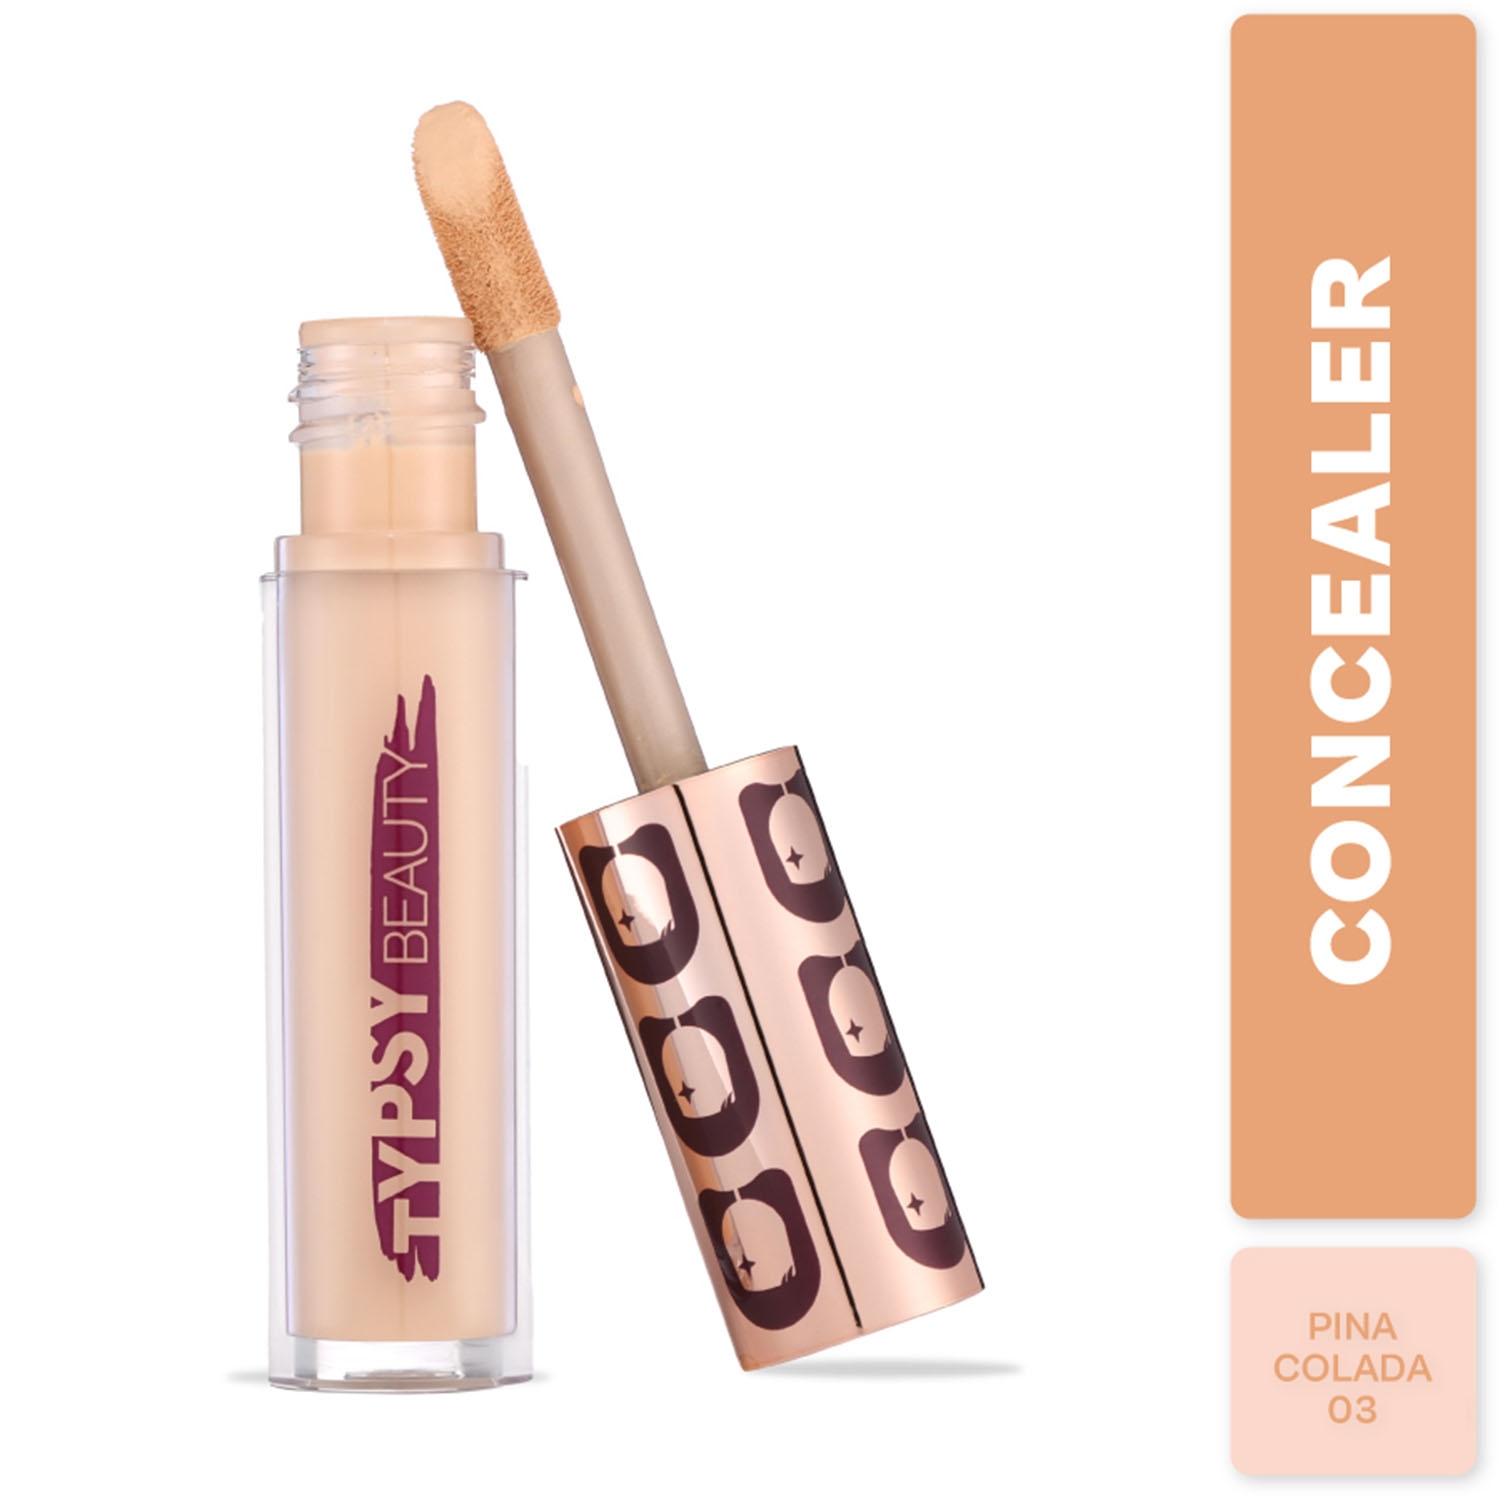 Typsy Beauty | Typsy Beauty Hangover Proof Full Coverage Concealer - 03 Pina Colada (5.8g)